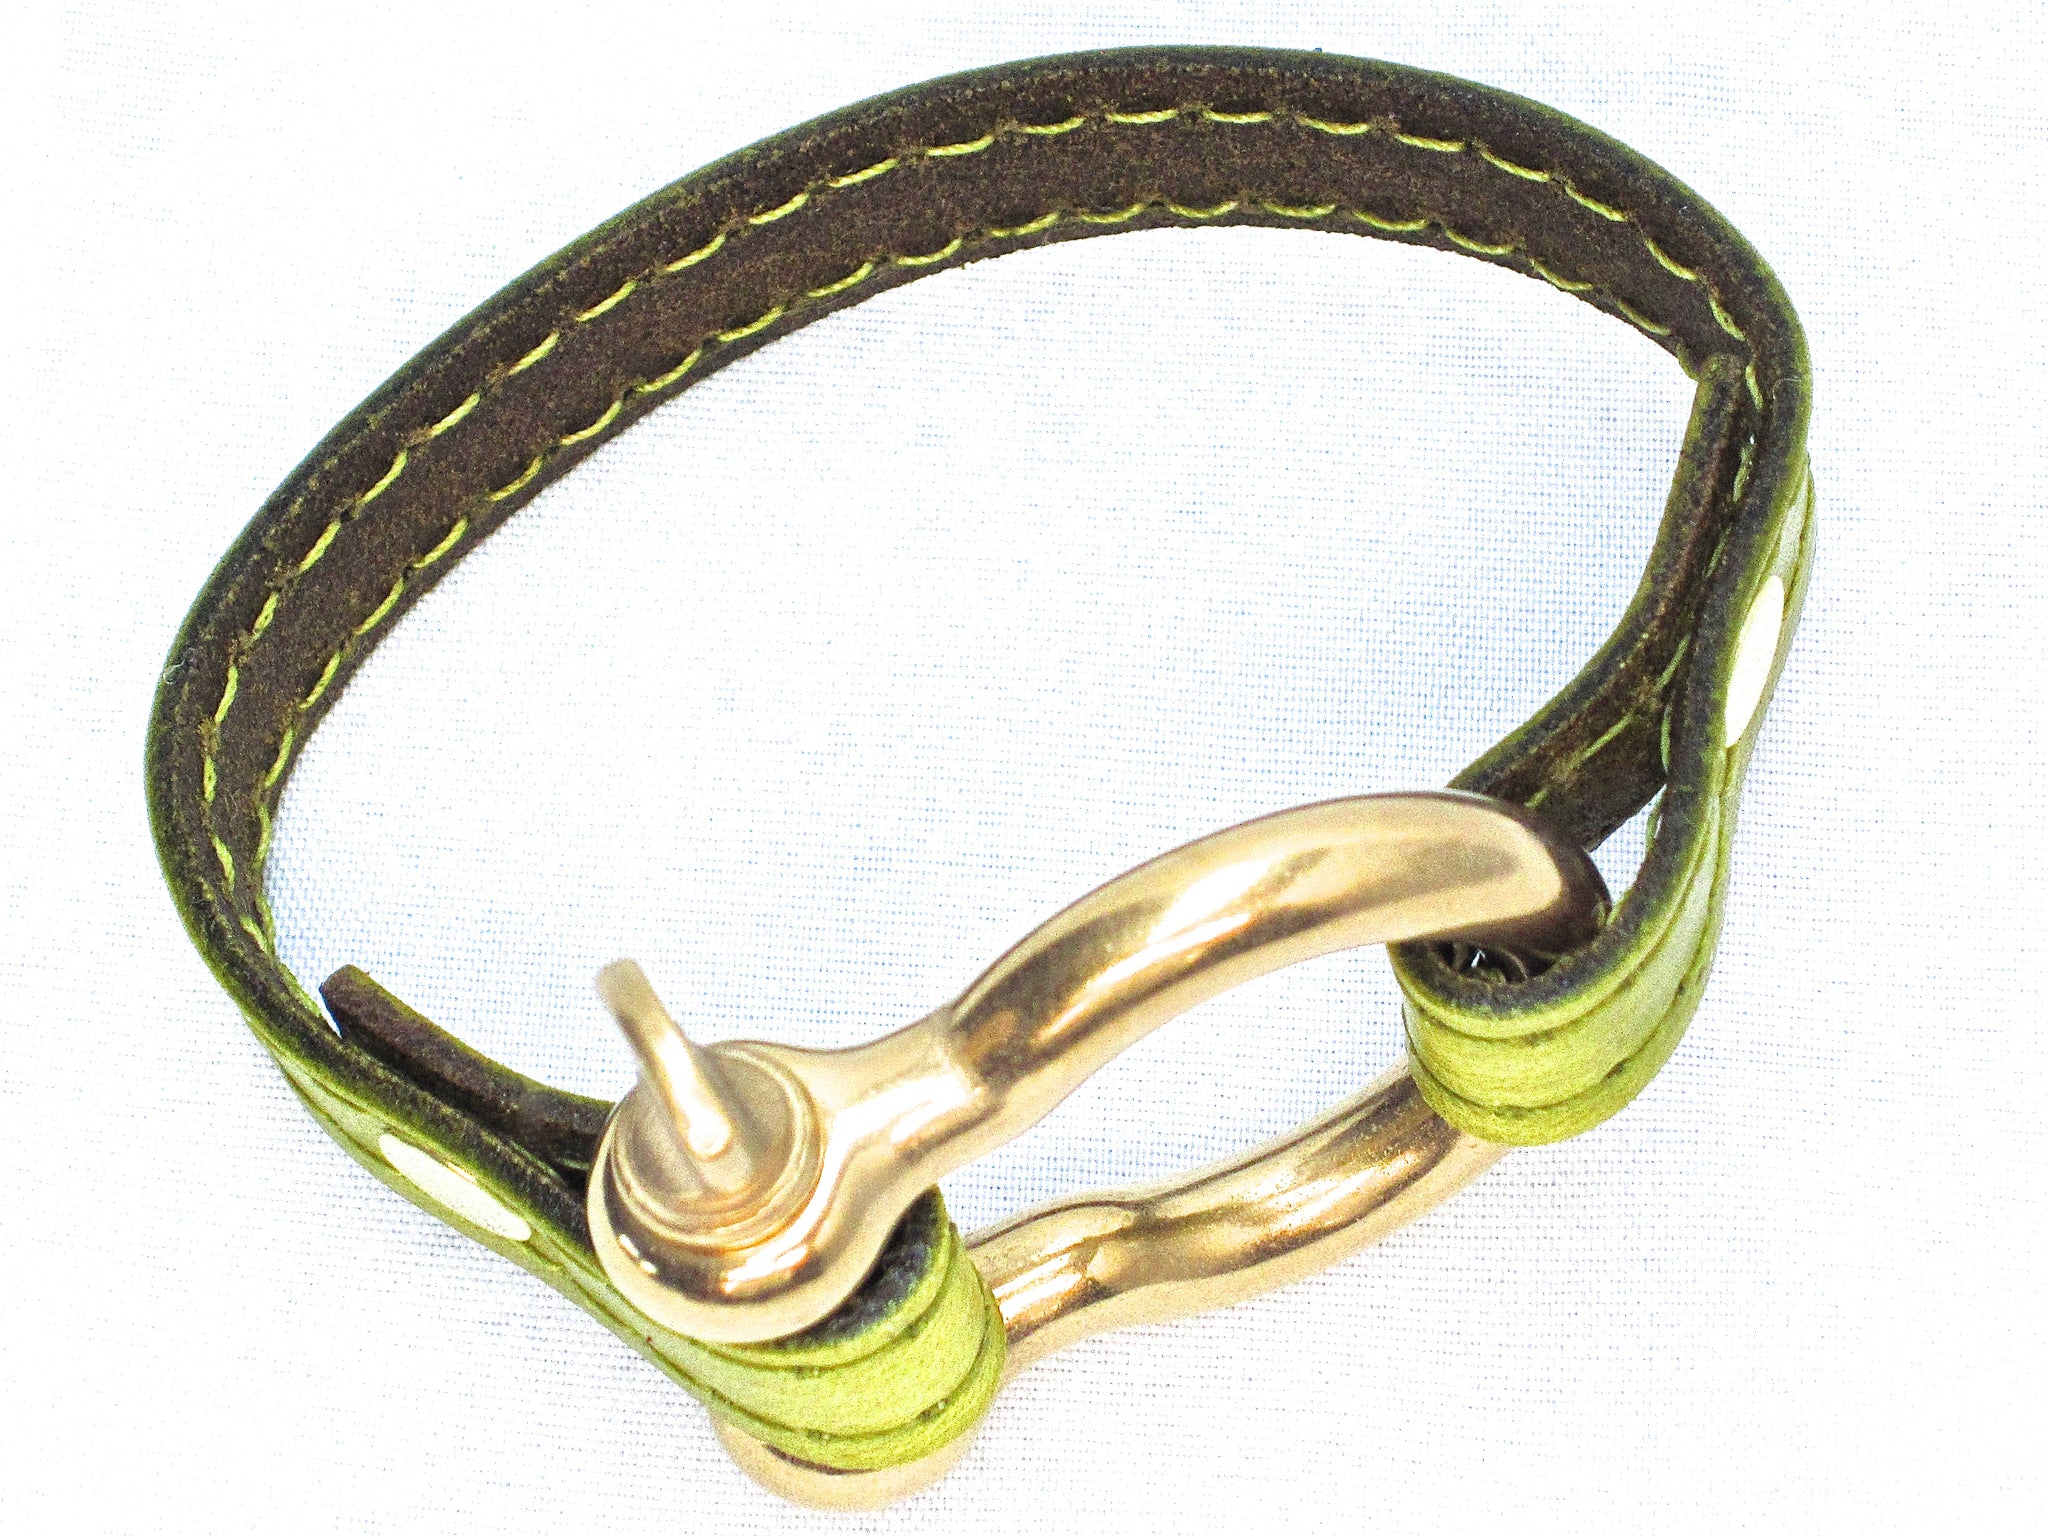 Nyet jewelry Signature Gold Bracelet Chartreuse by nyet jewelry